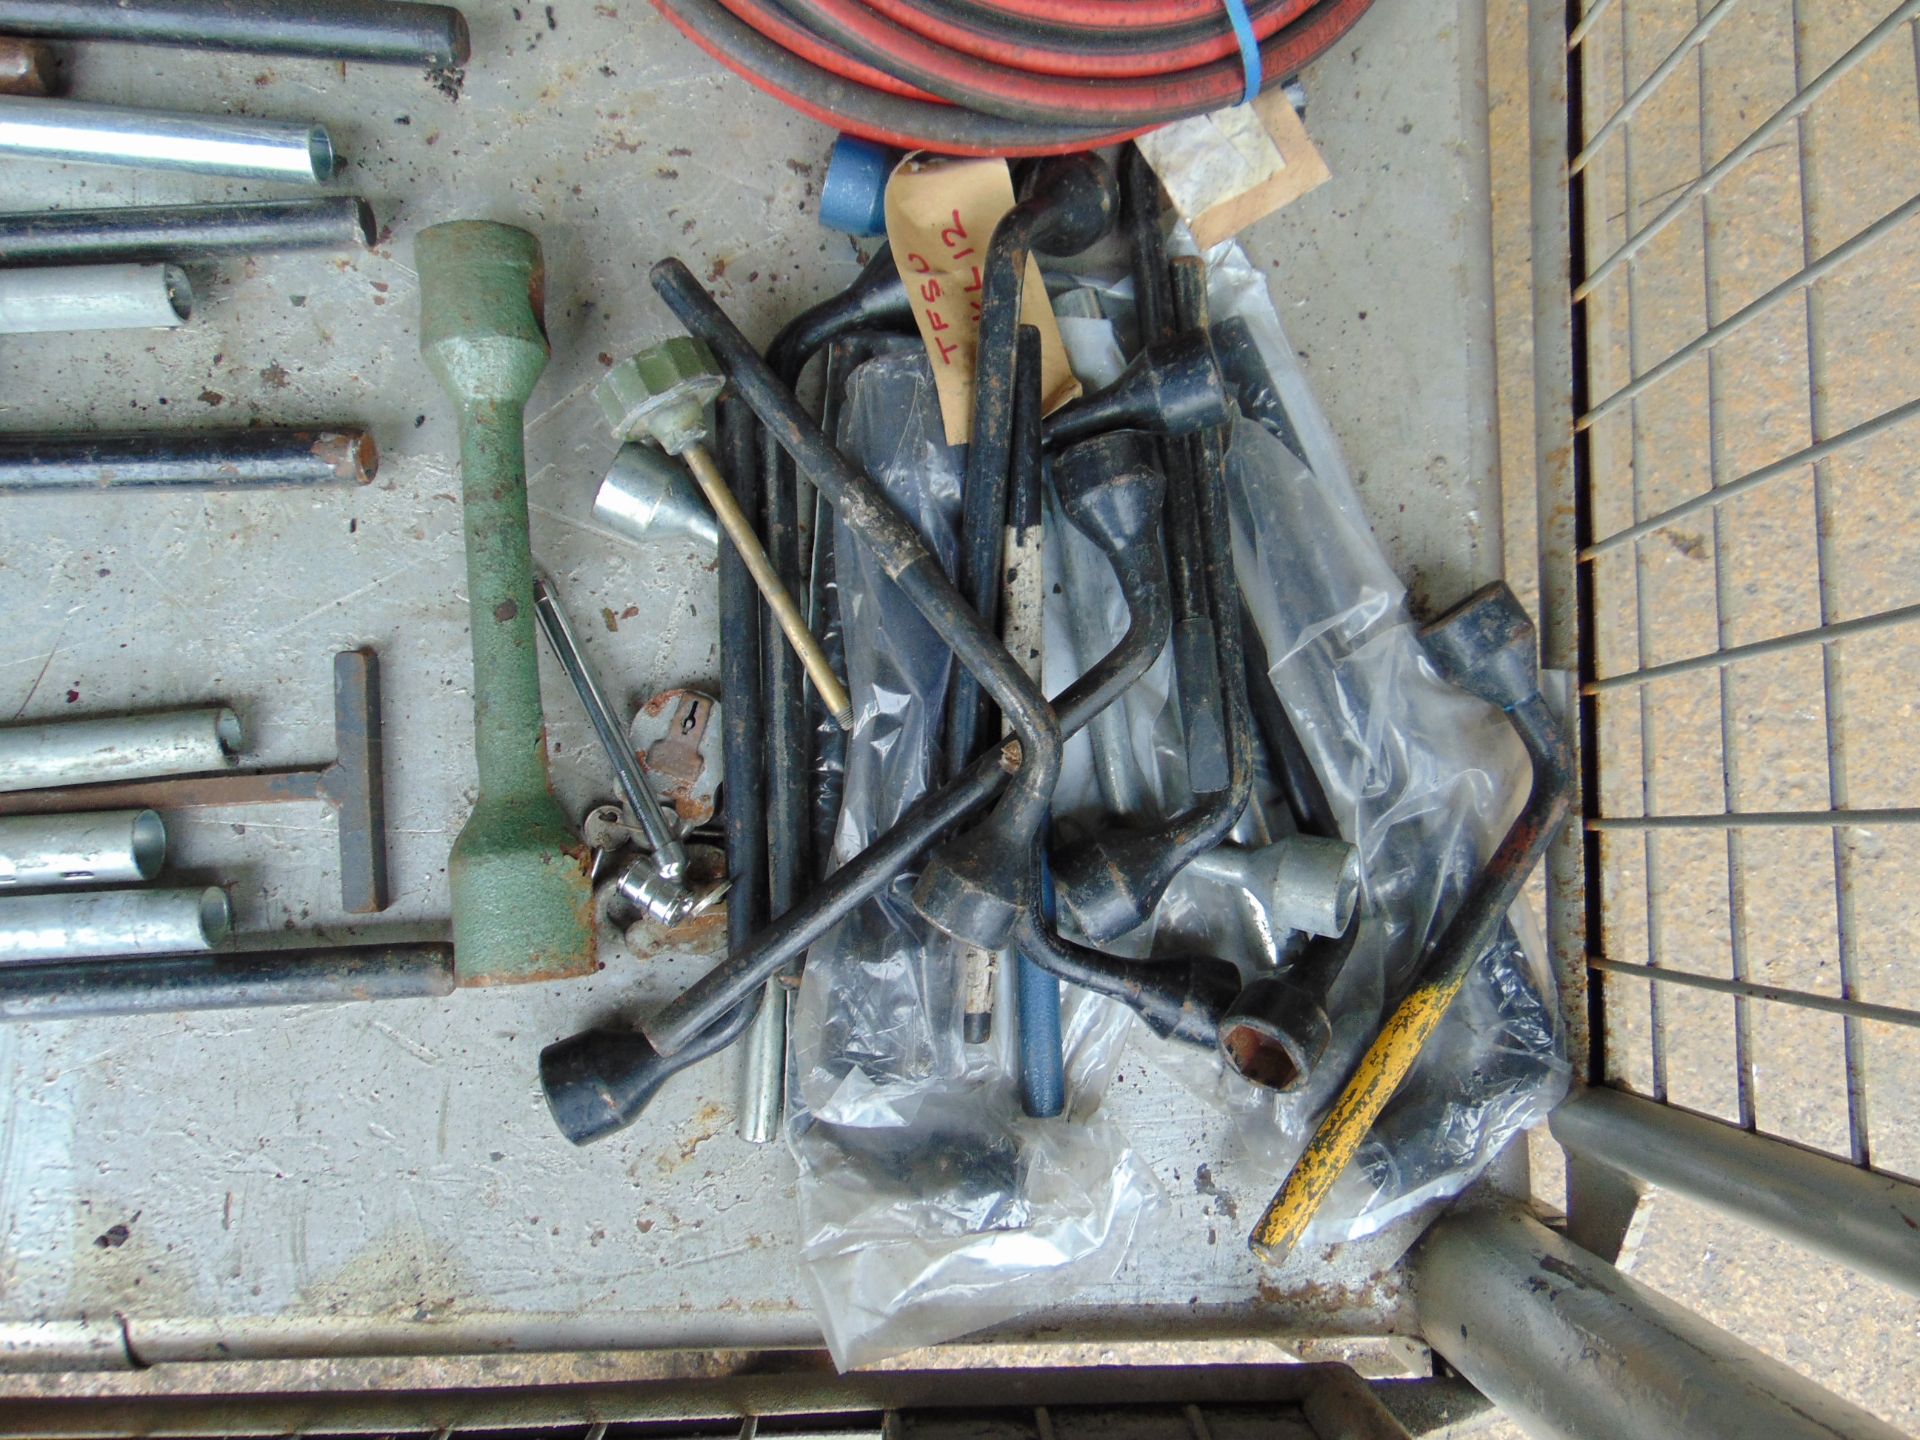 1 x Stillage Assortment of Tools, Wheel Wrenches, Air Line Etc - Image 3 of 5